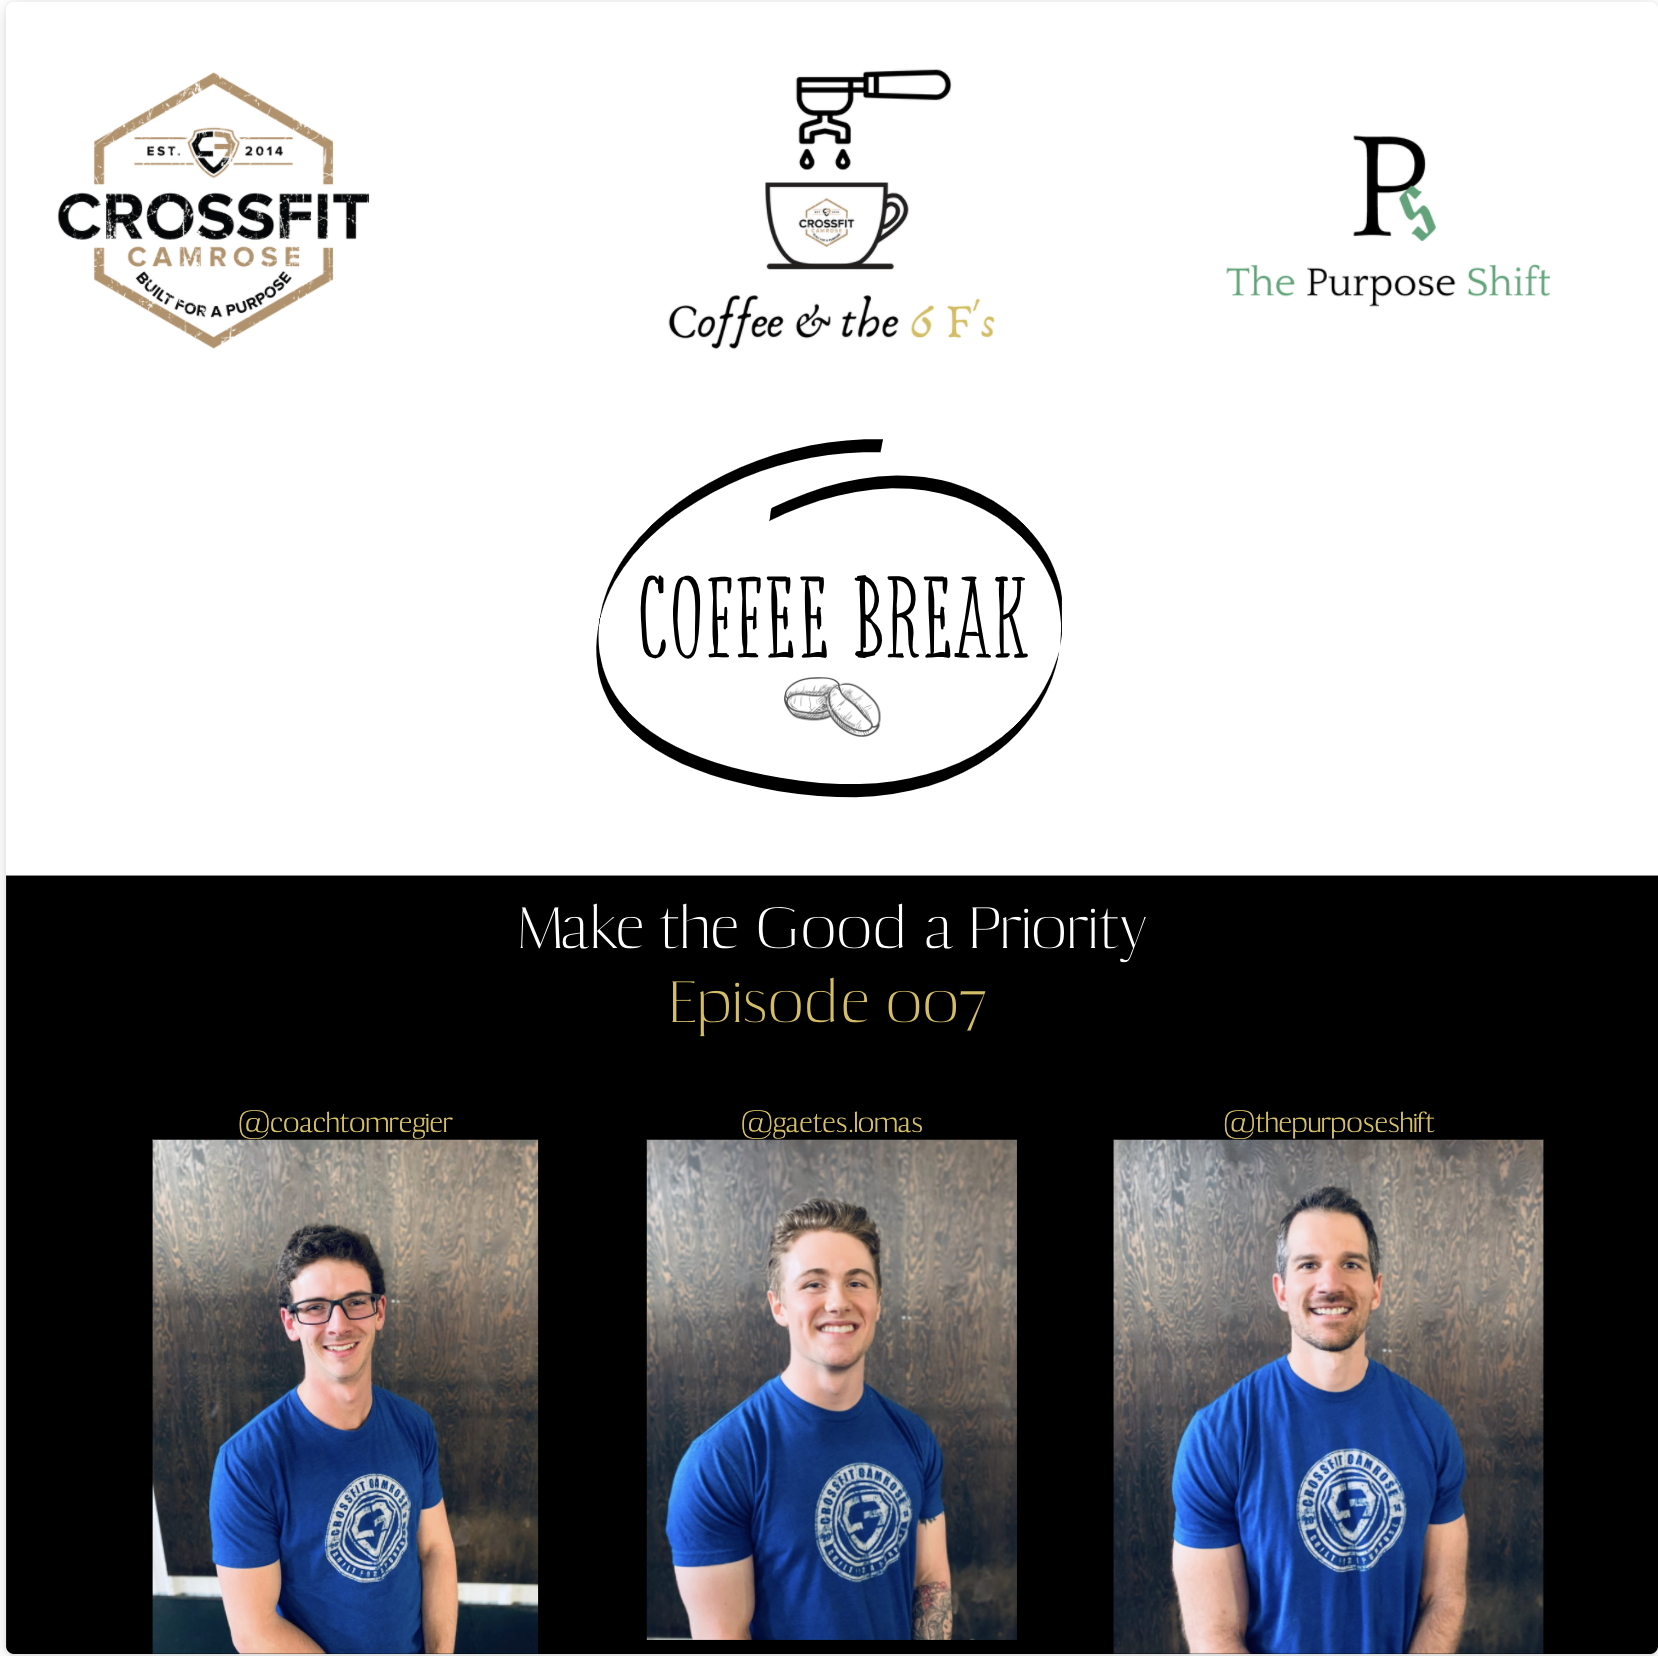 Coffee and the 6 F's - Episode 007 - Make the Good in Life a Priority